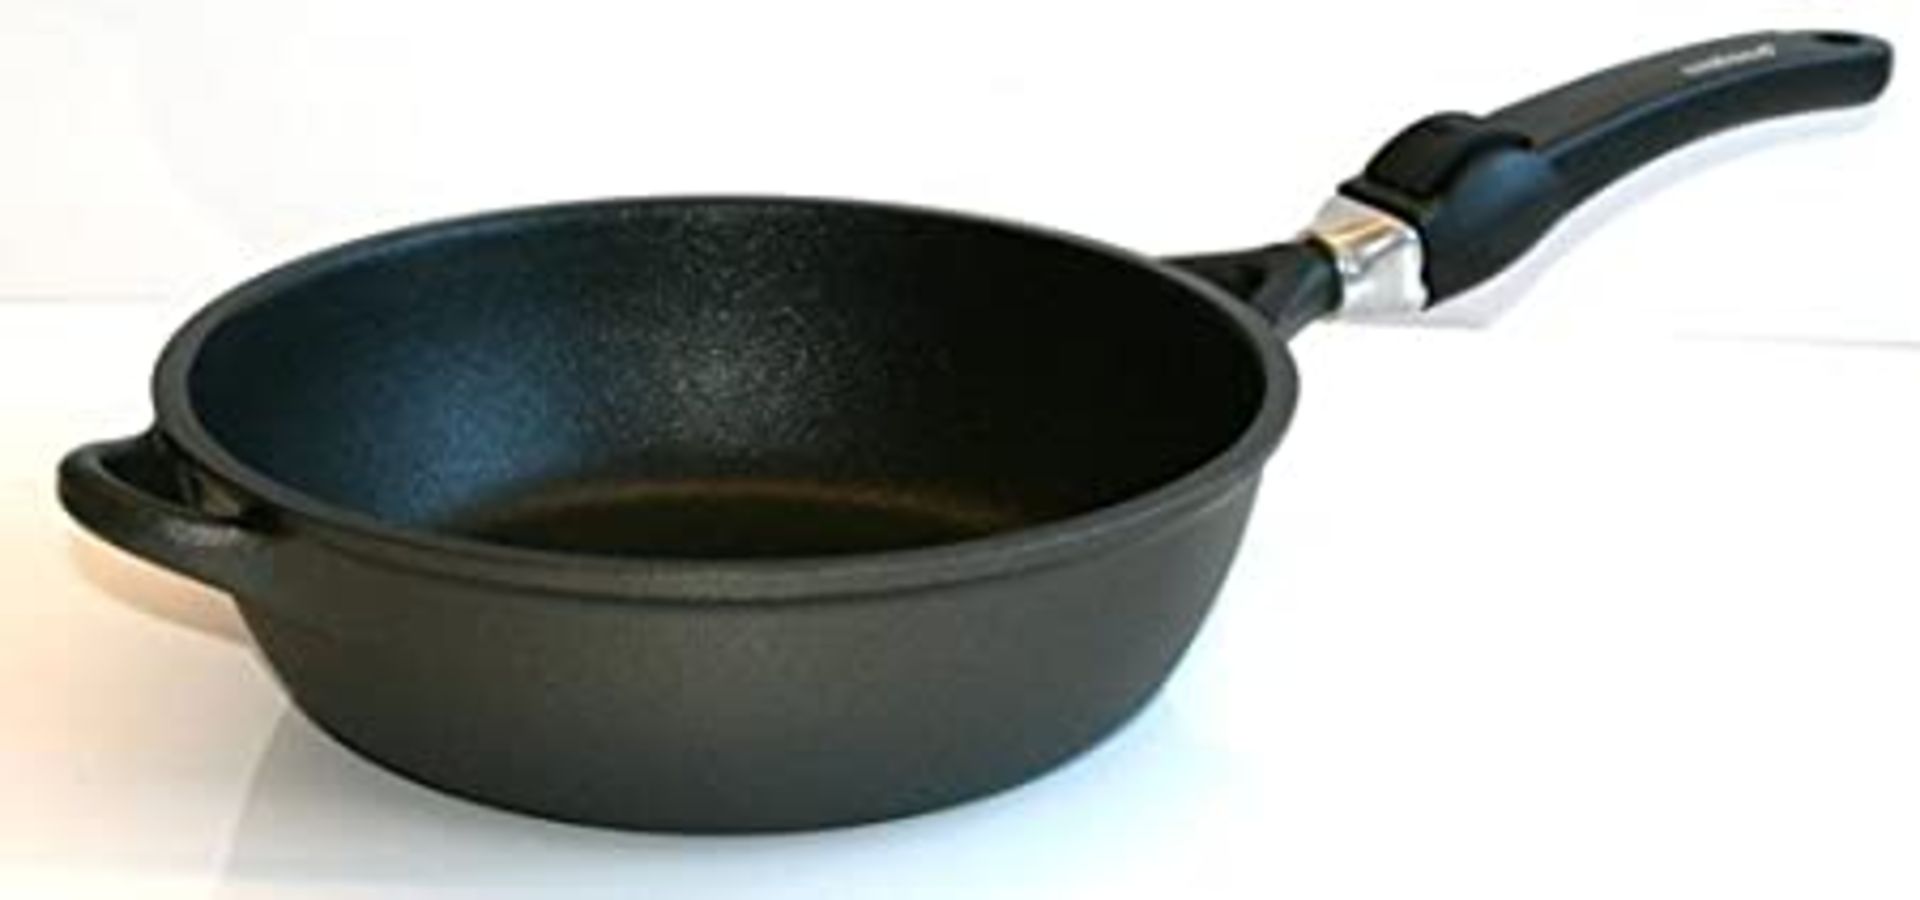 Crafond 24cm Saute Pan with detachable handle and lid - Image 5 of 7